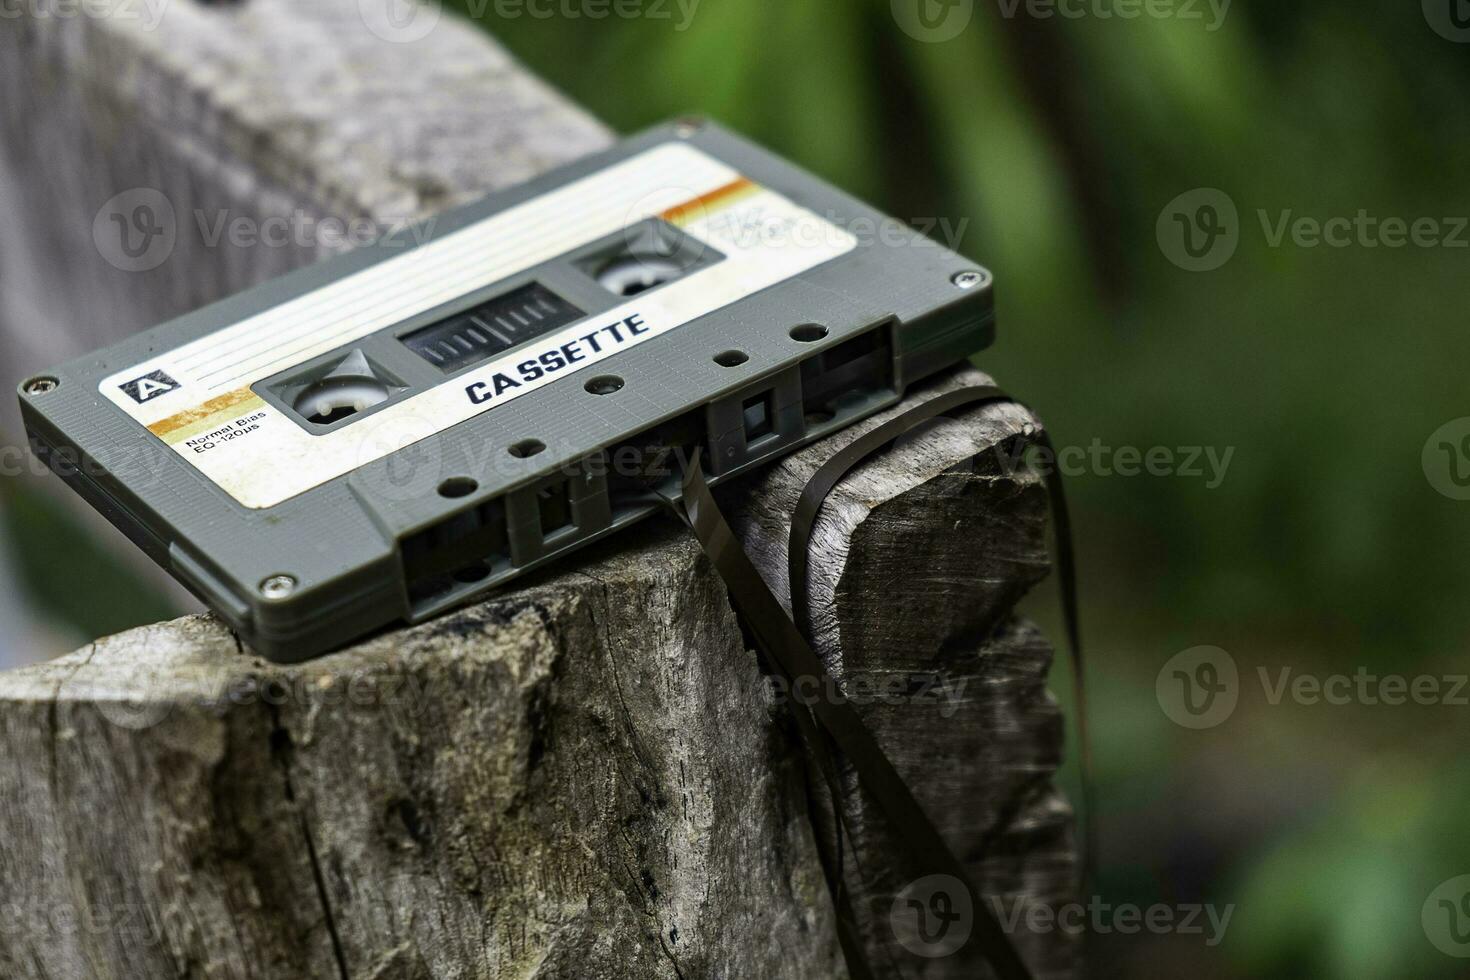 Compact cassette on table background photo